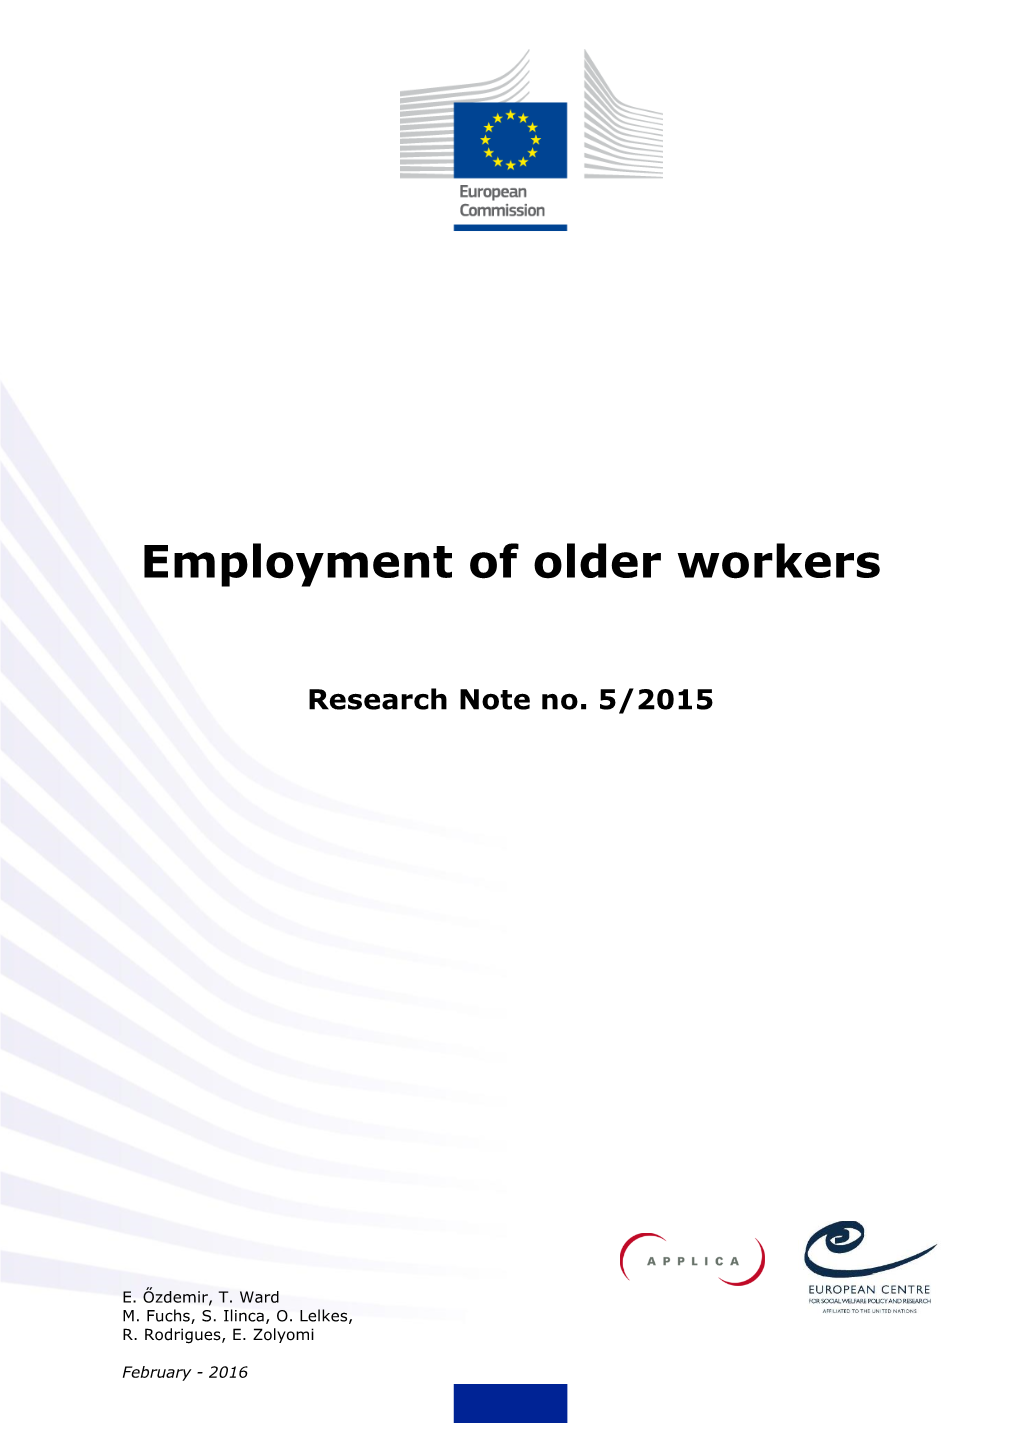 Employment of Older Workers